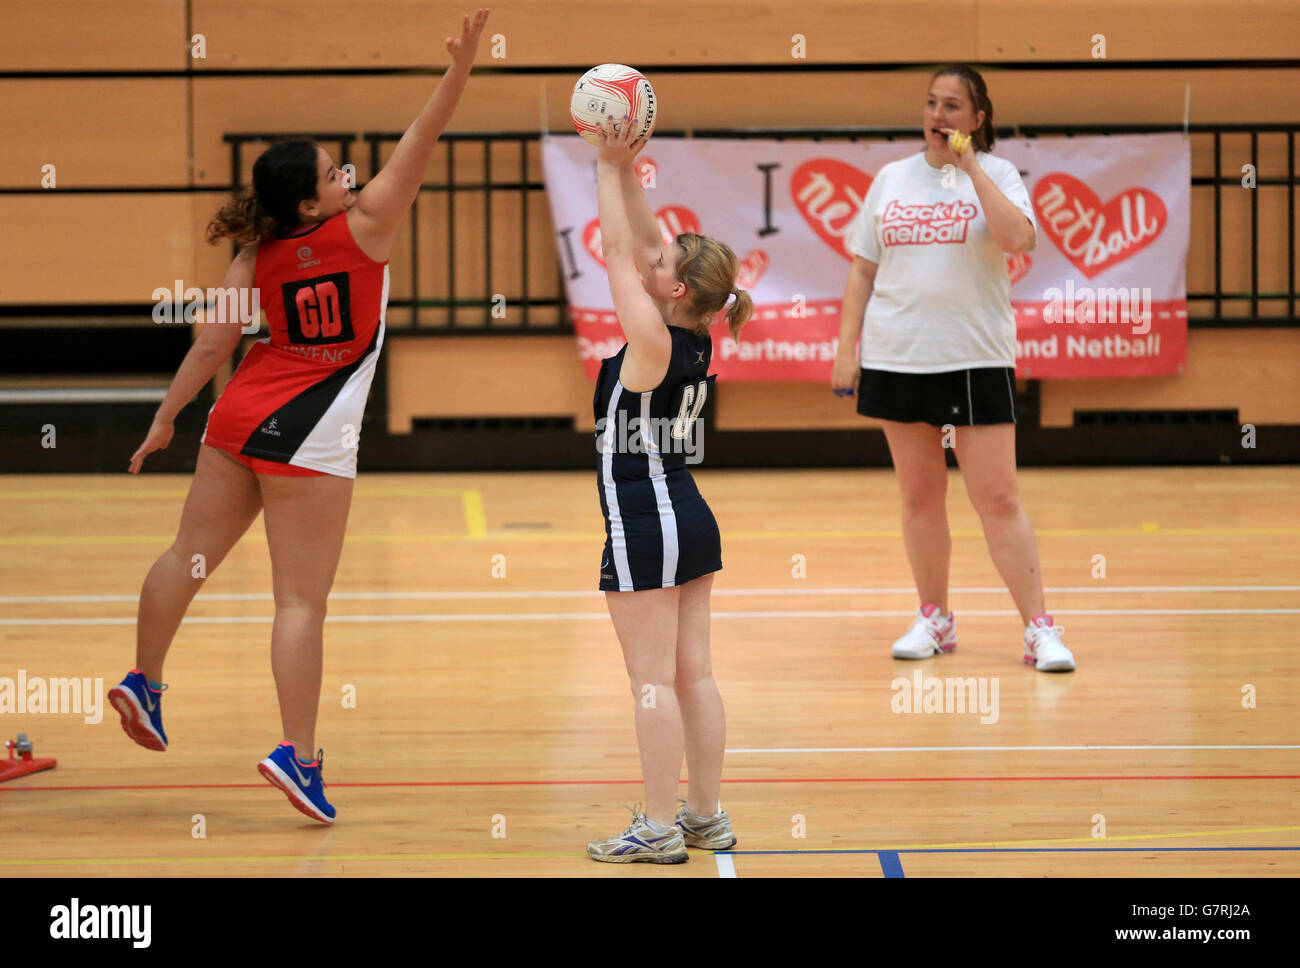 Images from the Netball in the City event at the Copper Box Arena, London Stock Photo